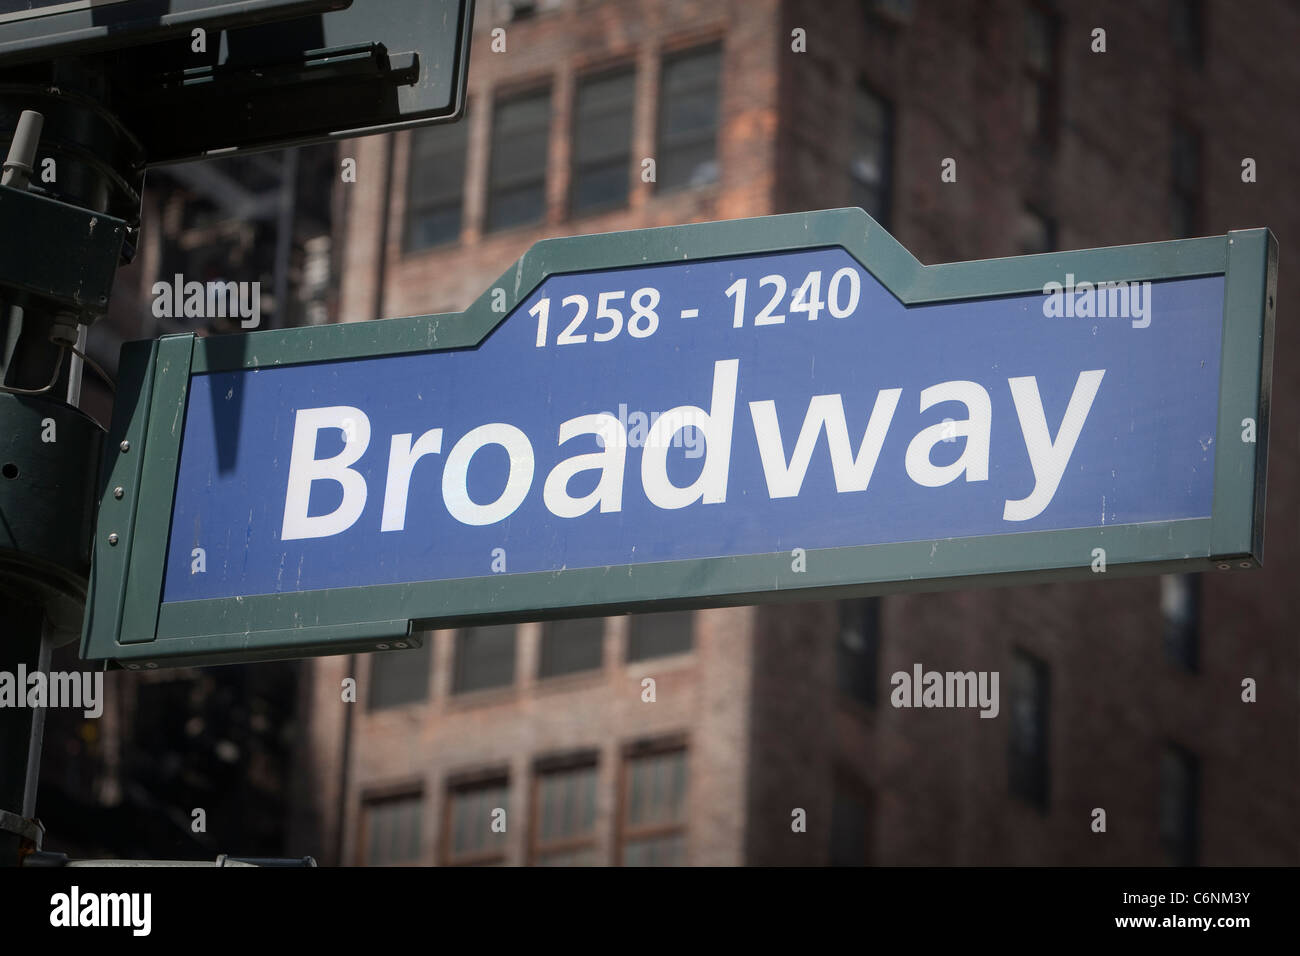 A Broadway street sign is seen in the New York City borough of Manhattan, NY, Thursday August 4, 2011. Stock Photo